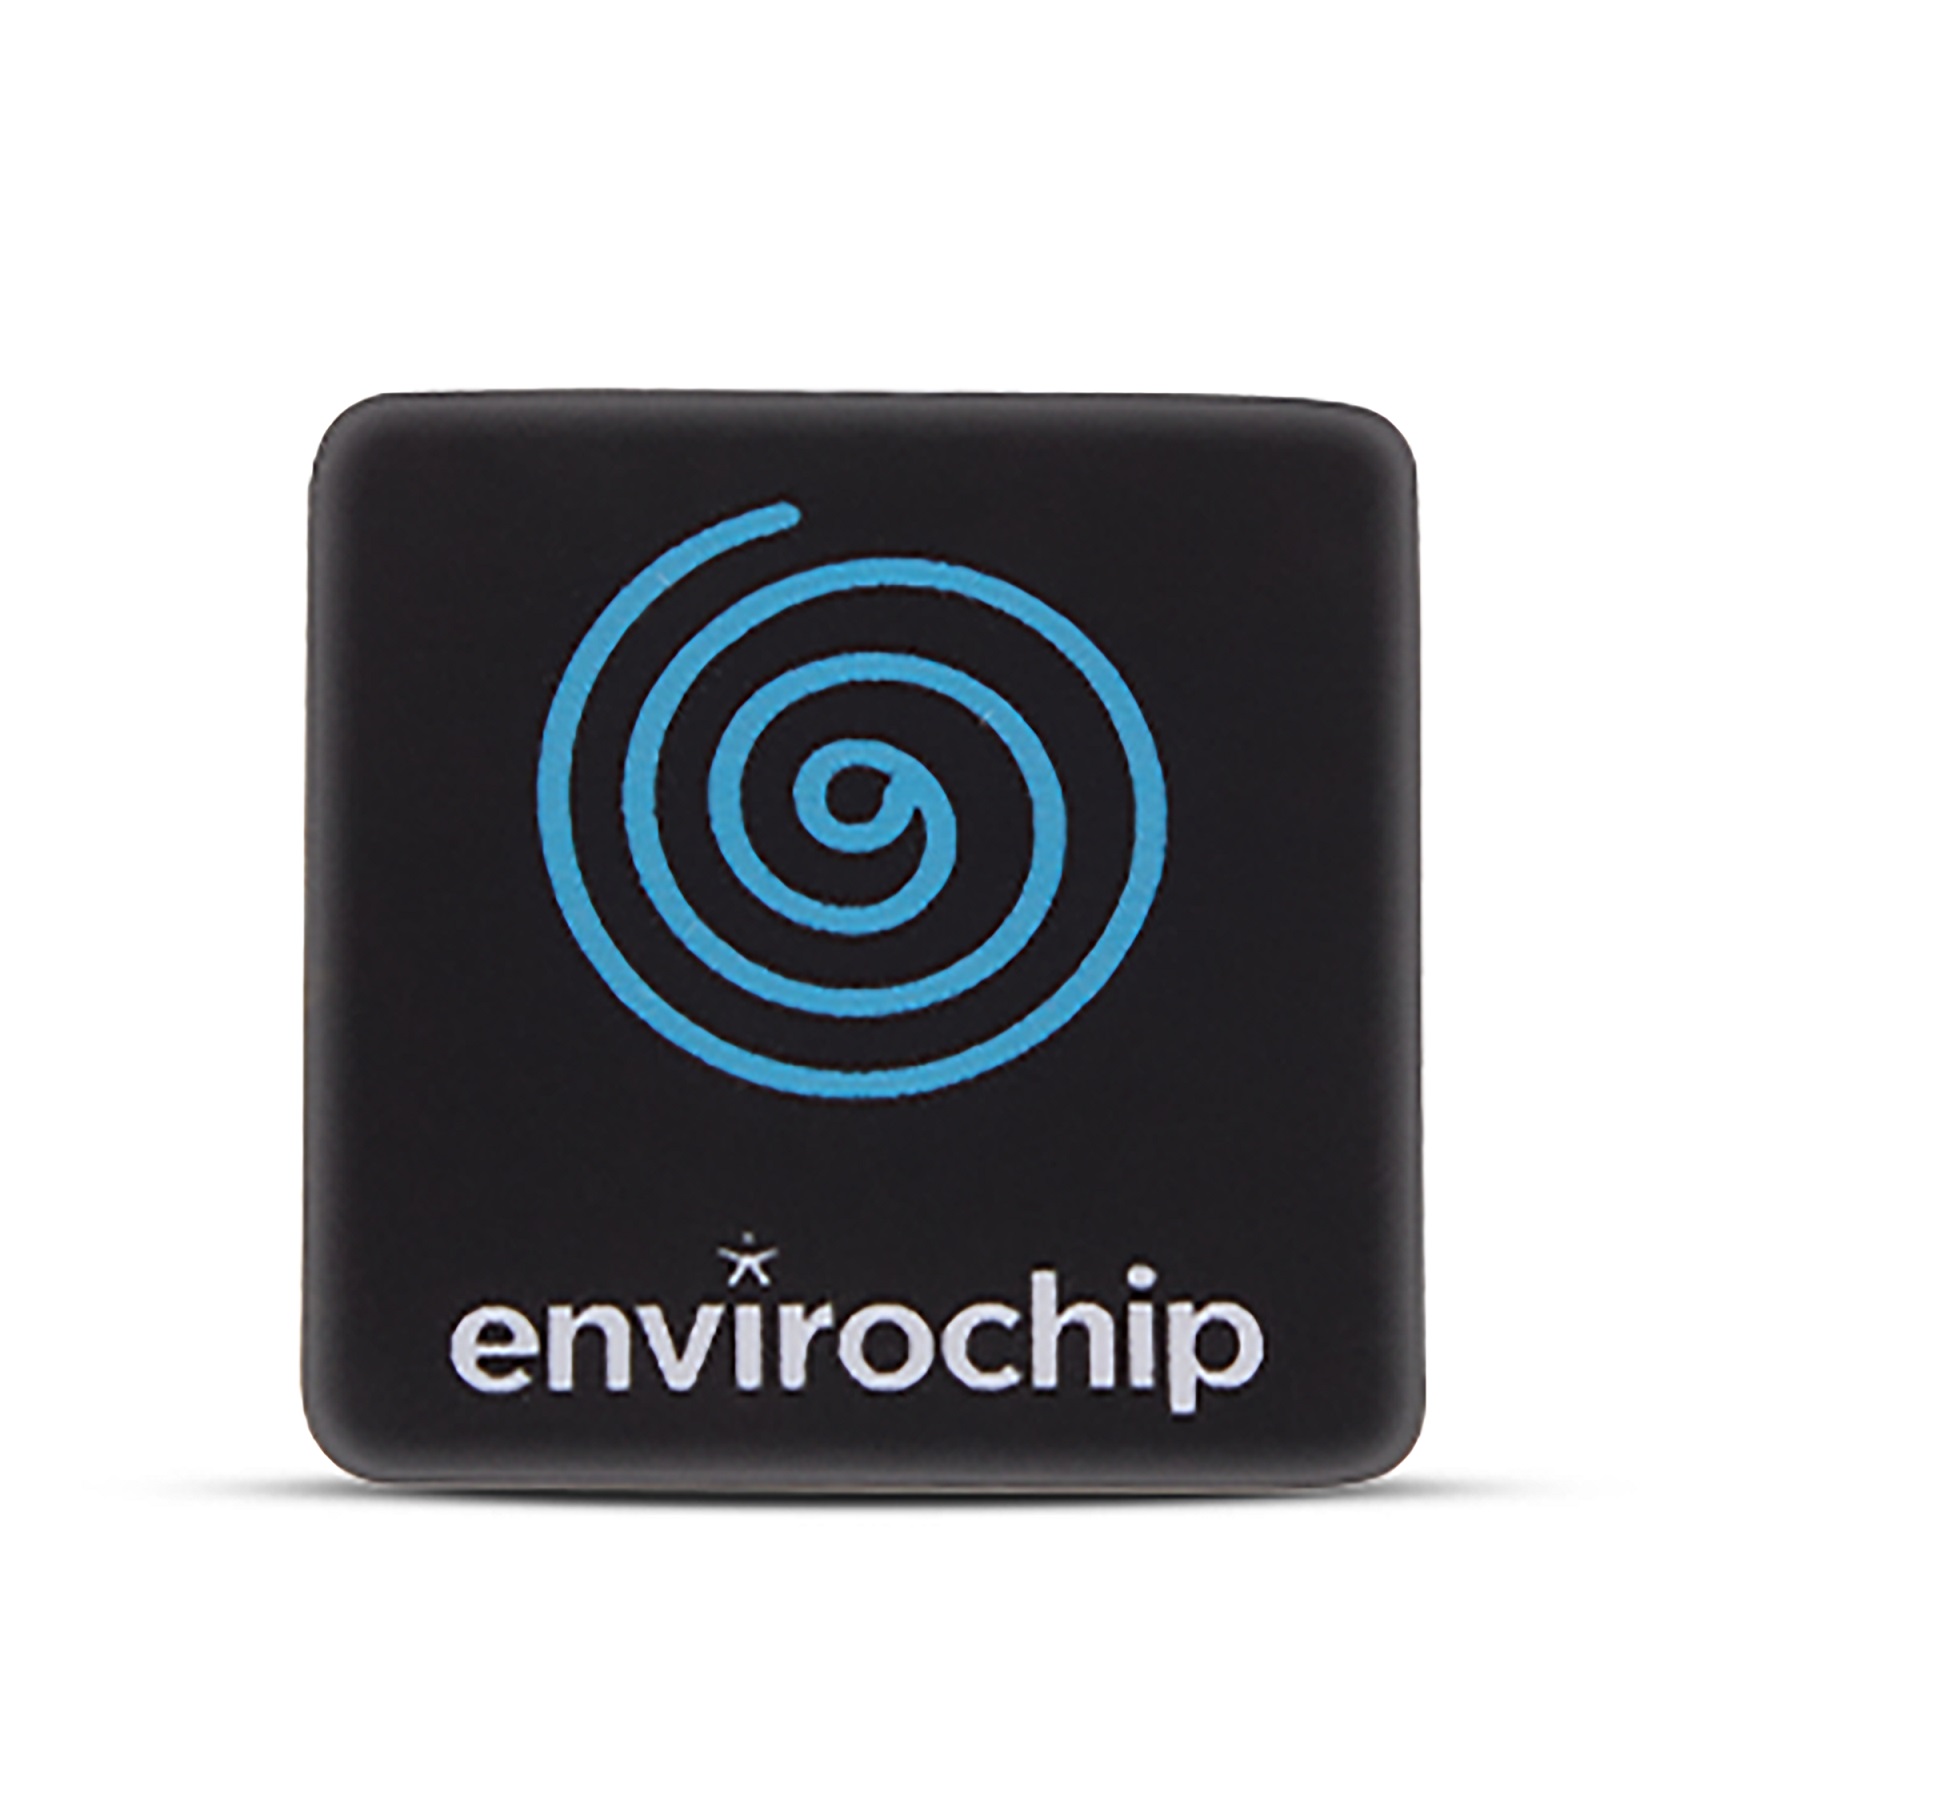 envirochip-clinically-tested-patented-anti-radiation-chip-for-tablet-wi-fi-pc-monitor-elements-design-air-black